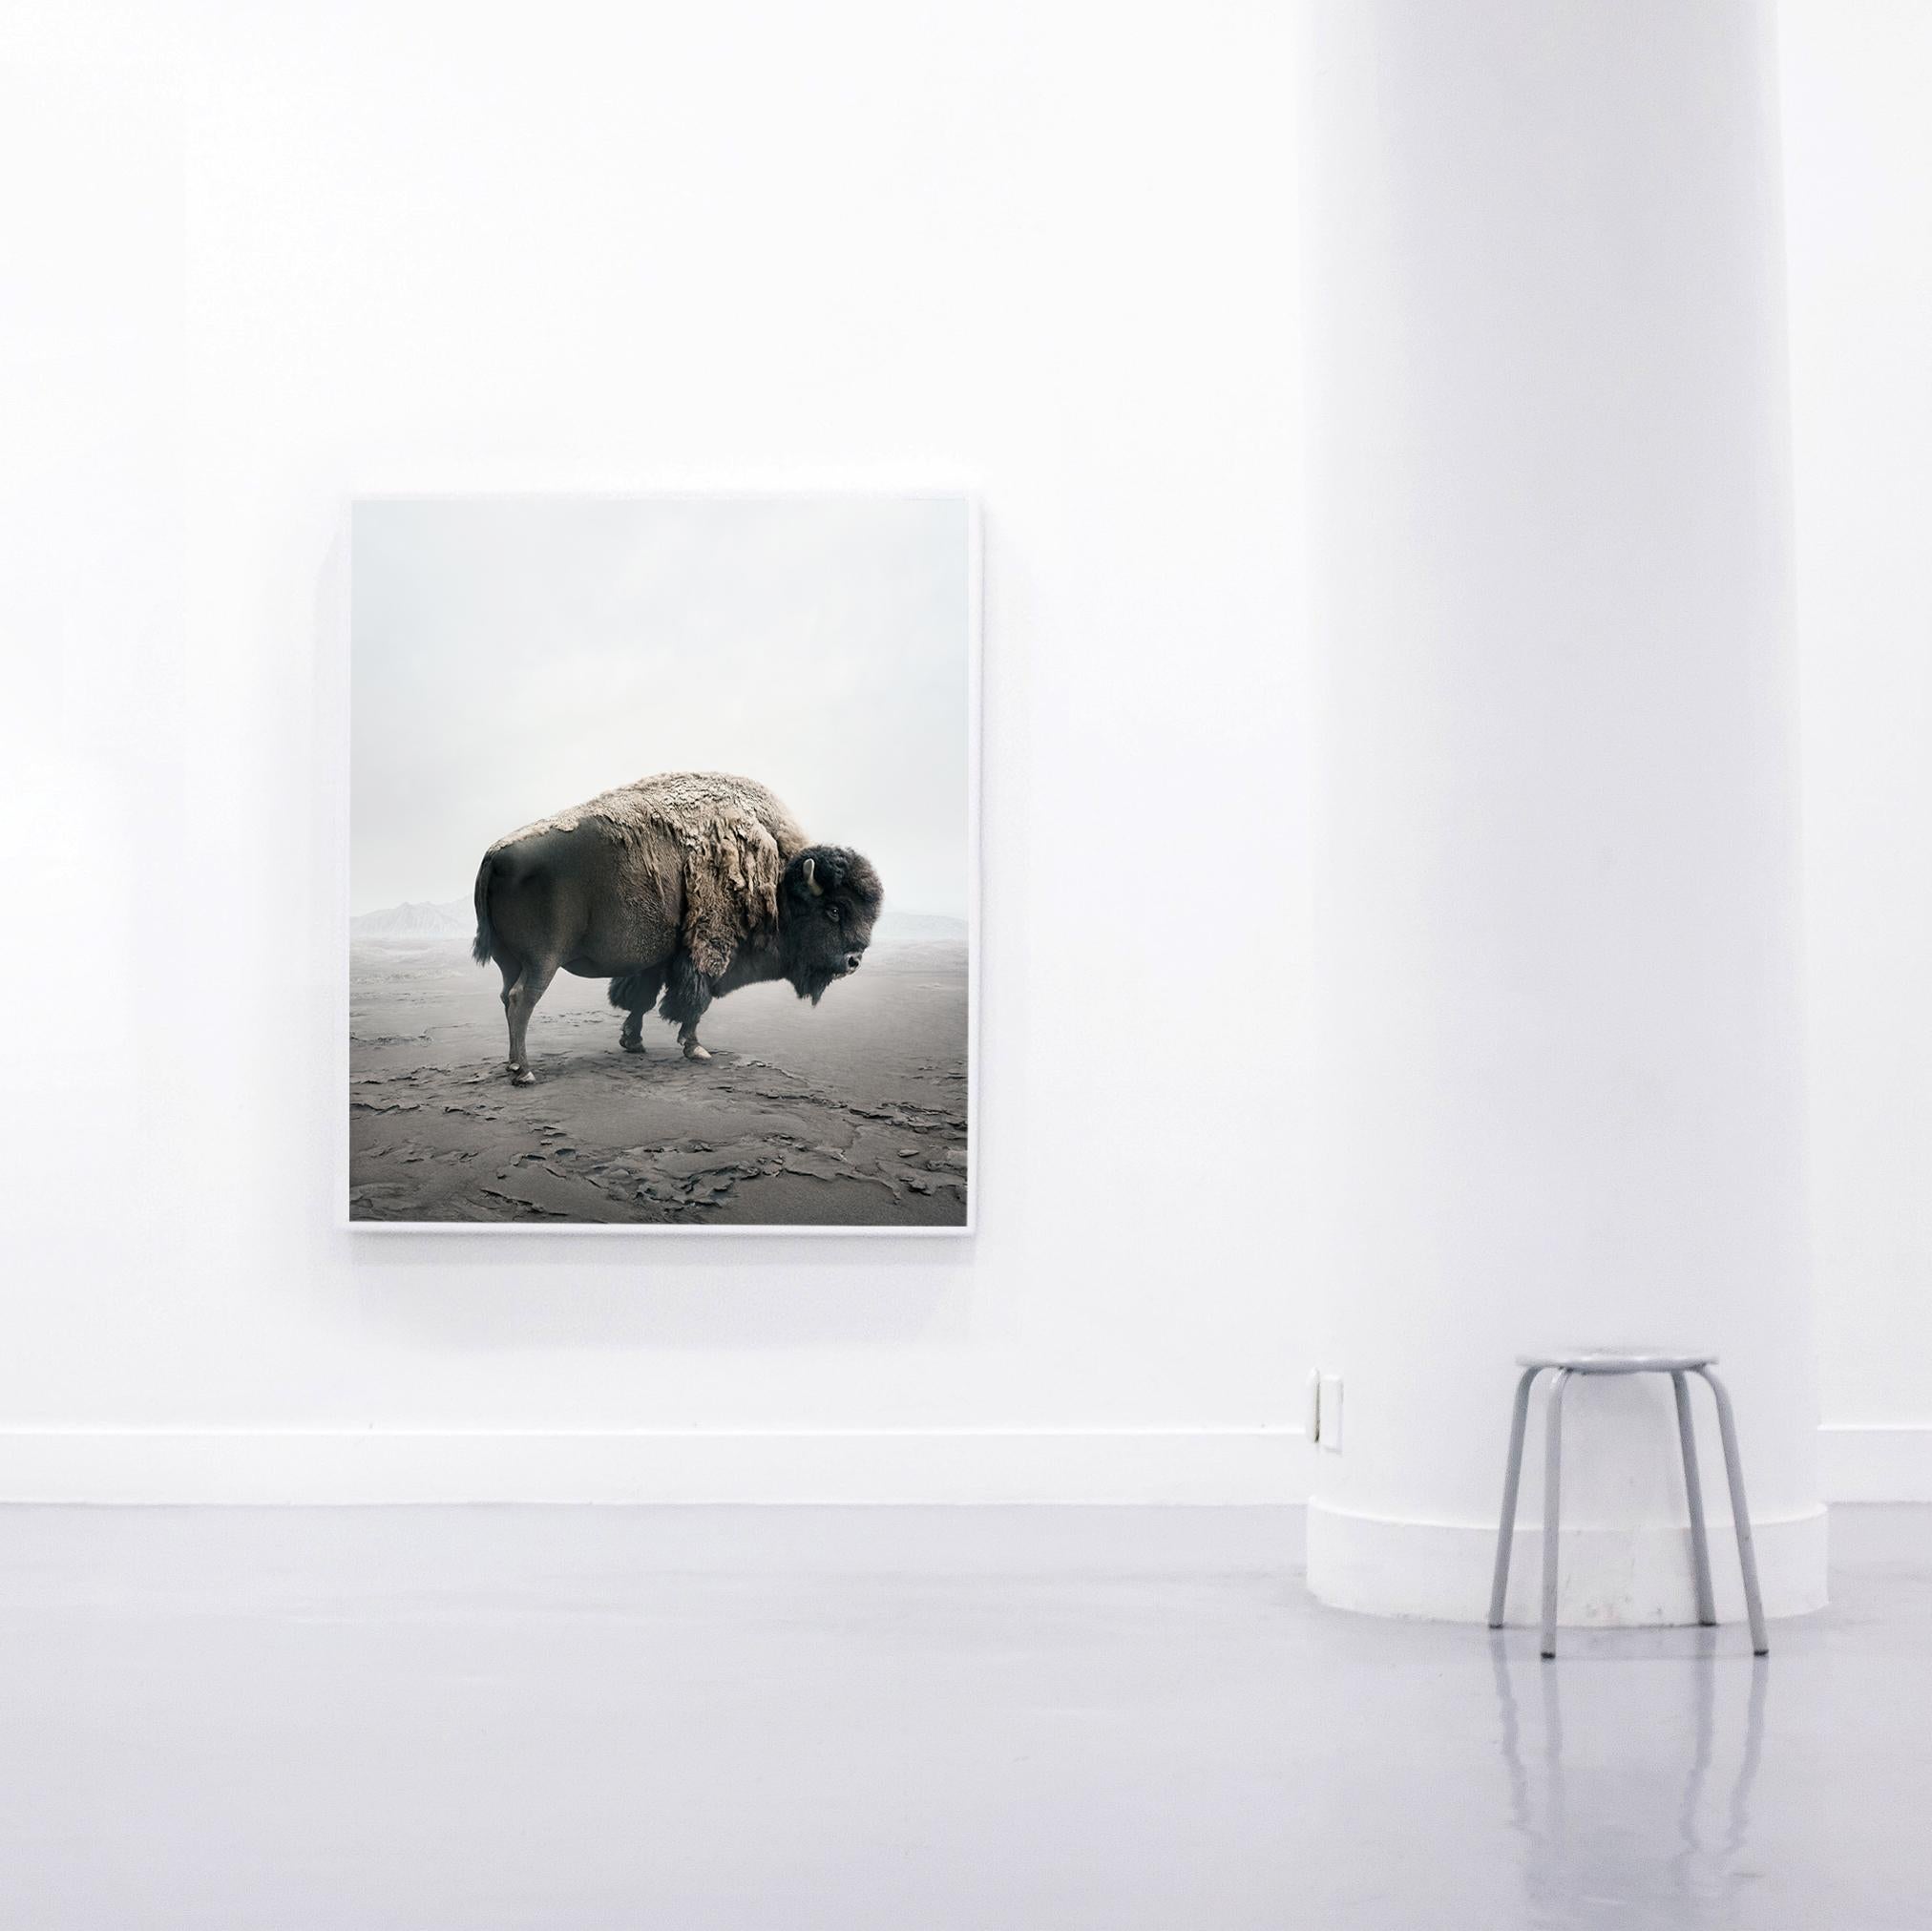 In this series, Zilberberg creates animal montages as an expression of self-therapy. As a person living in the west, moving through a daily life that is sometimes high-paced and emotionally complex, the artist finds calm in the presence of these